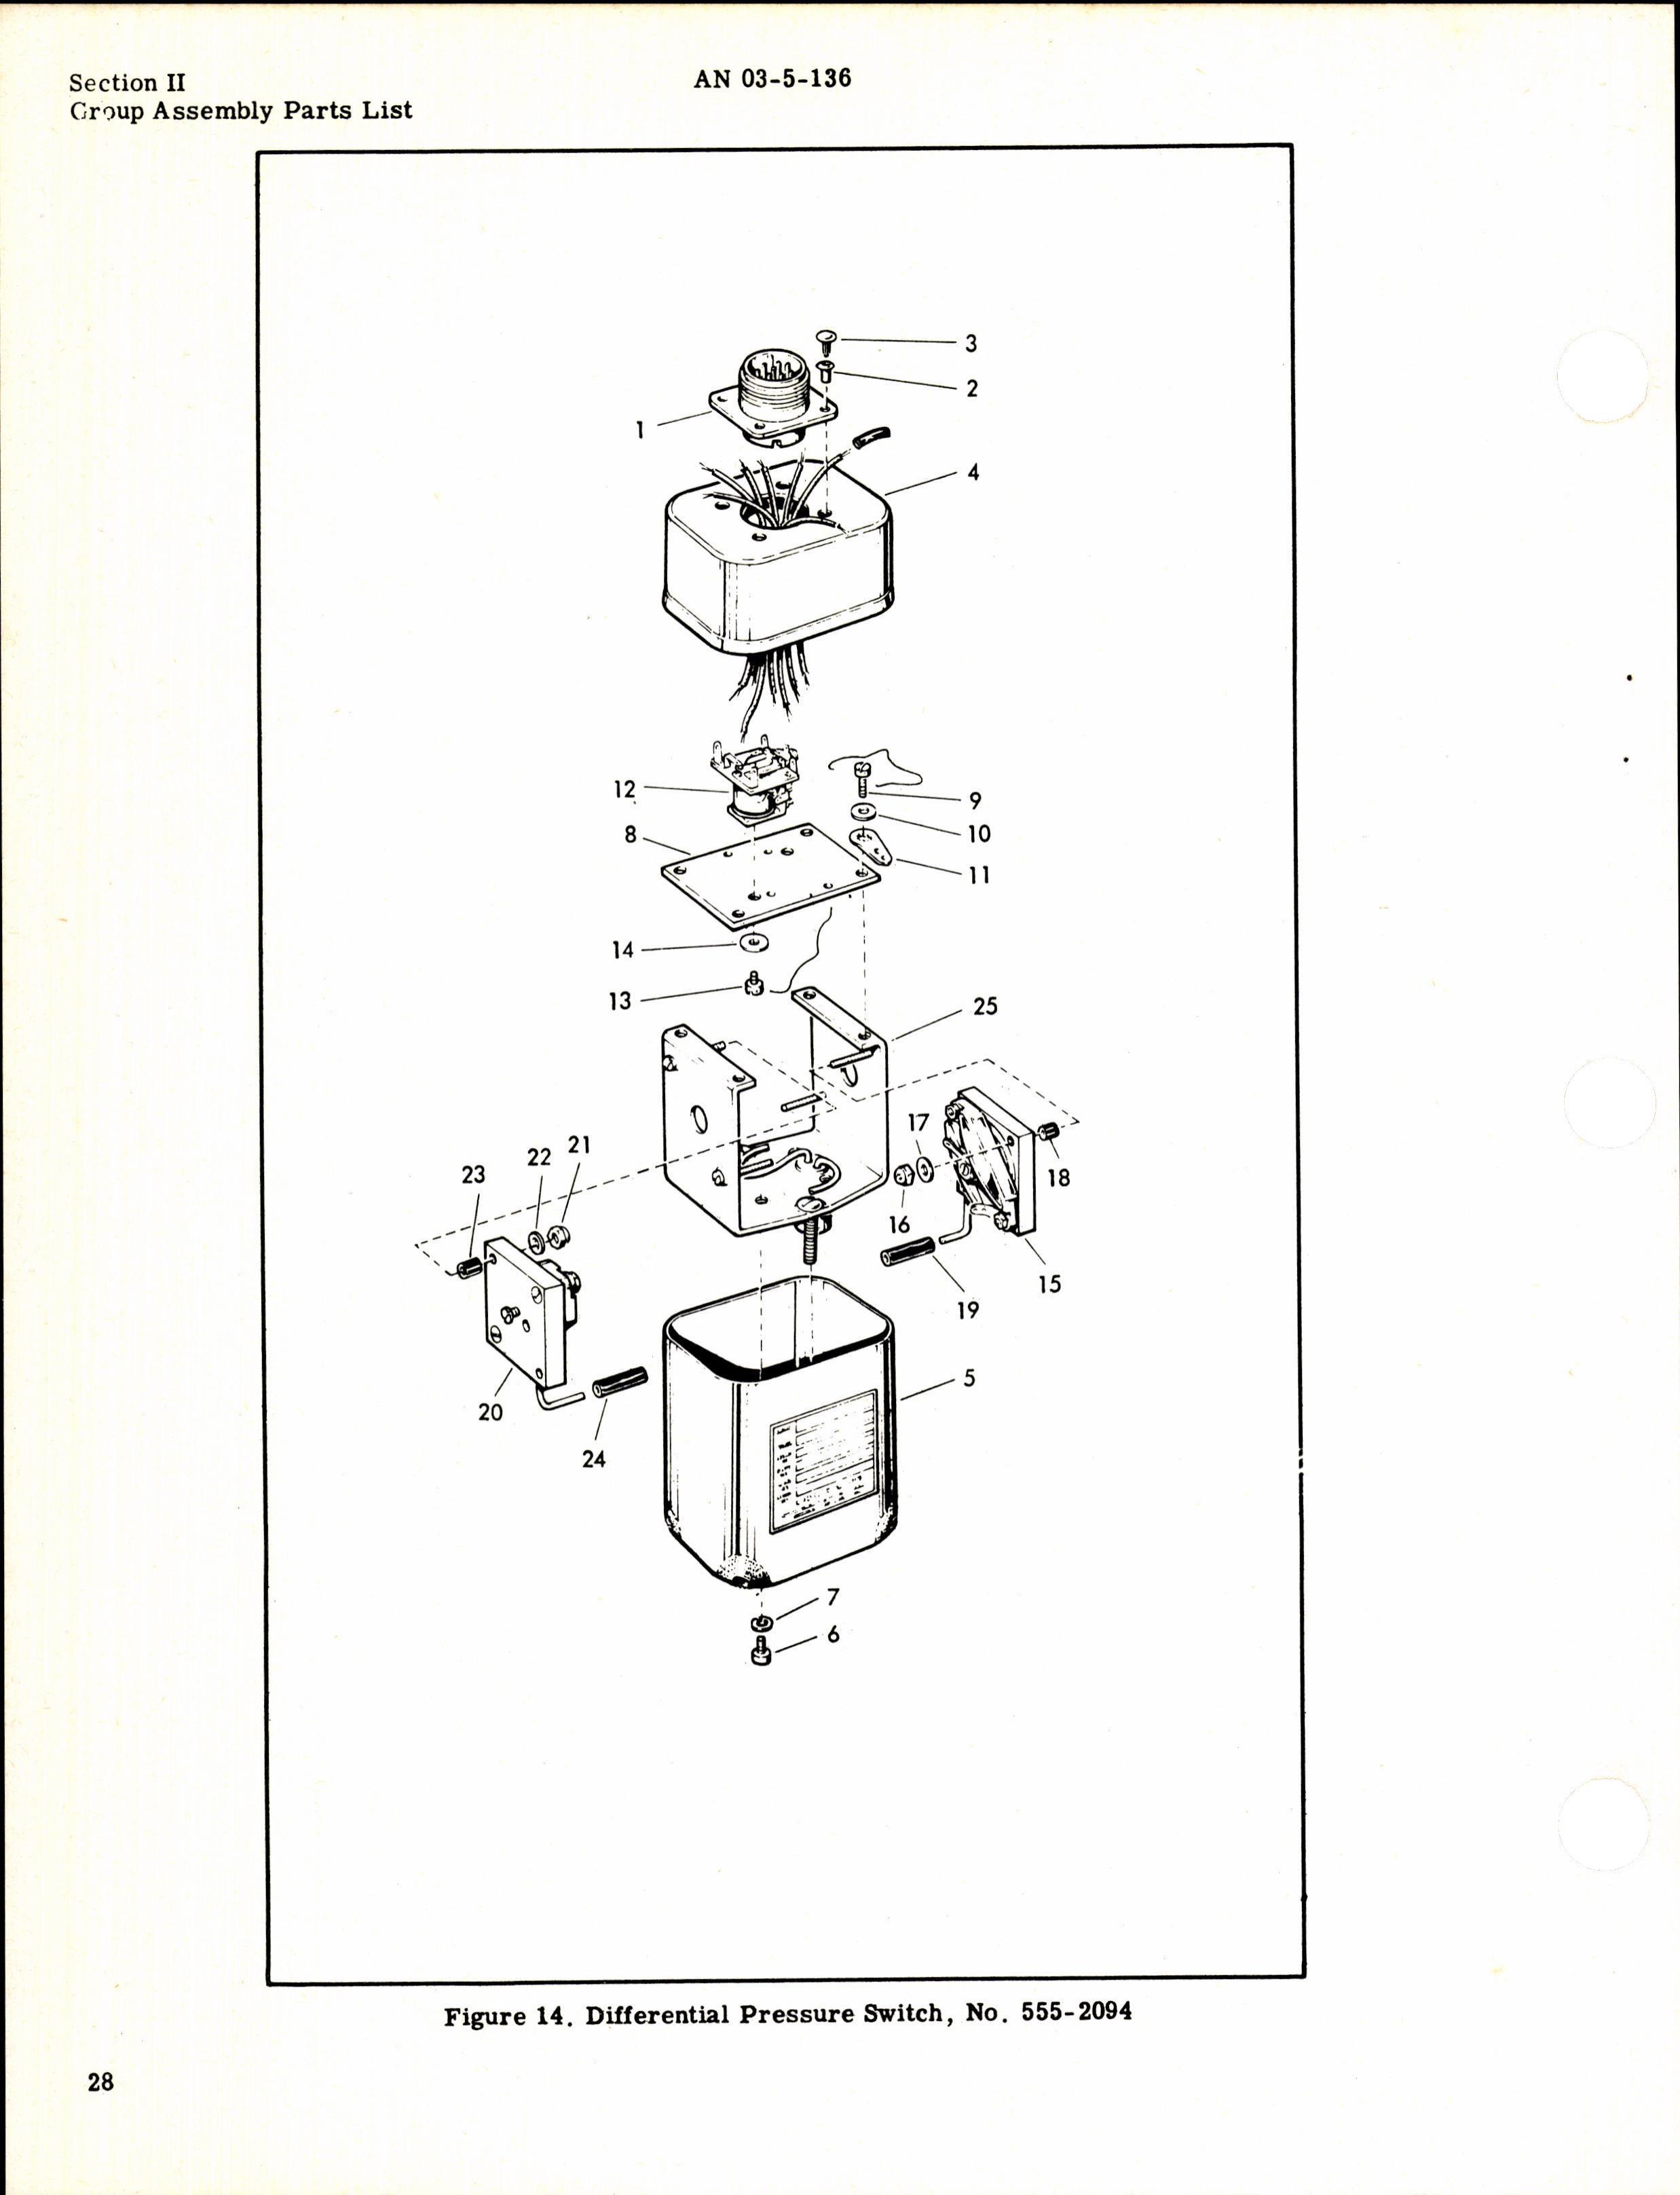 Sample page 8 from AirCorps Library document: Parts Catalog for Cook Pressure Control Switches